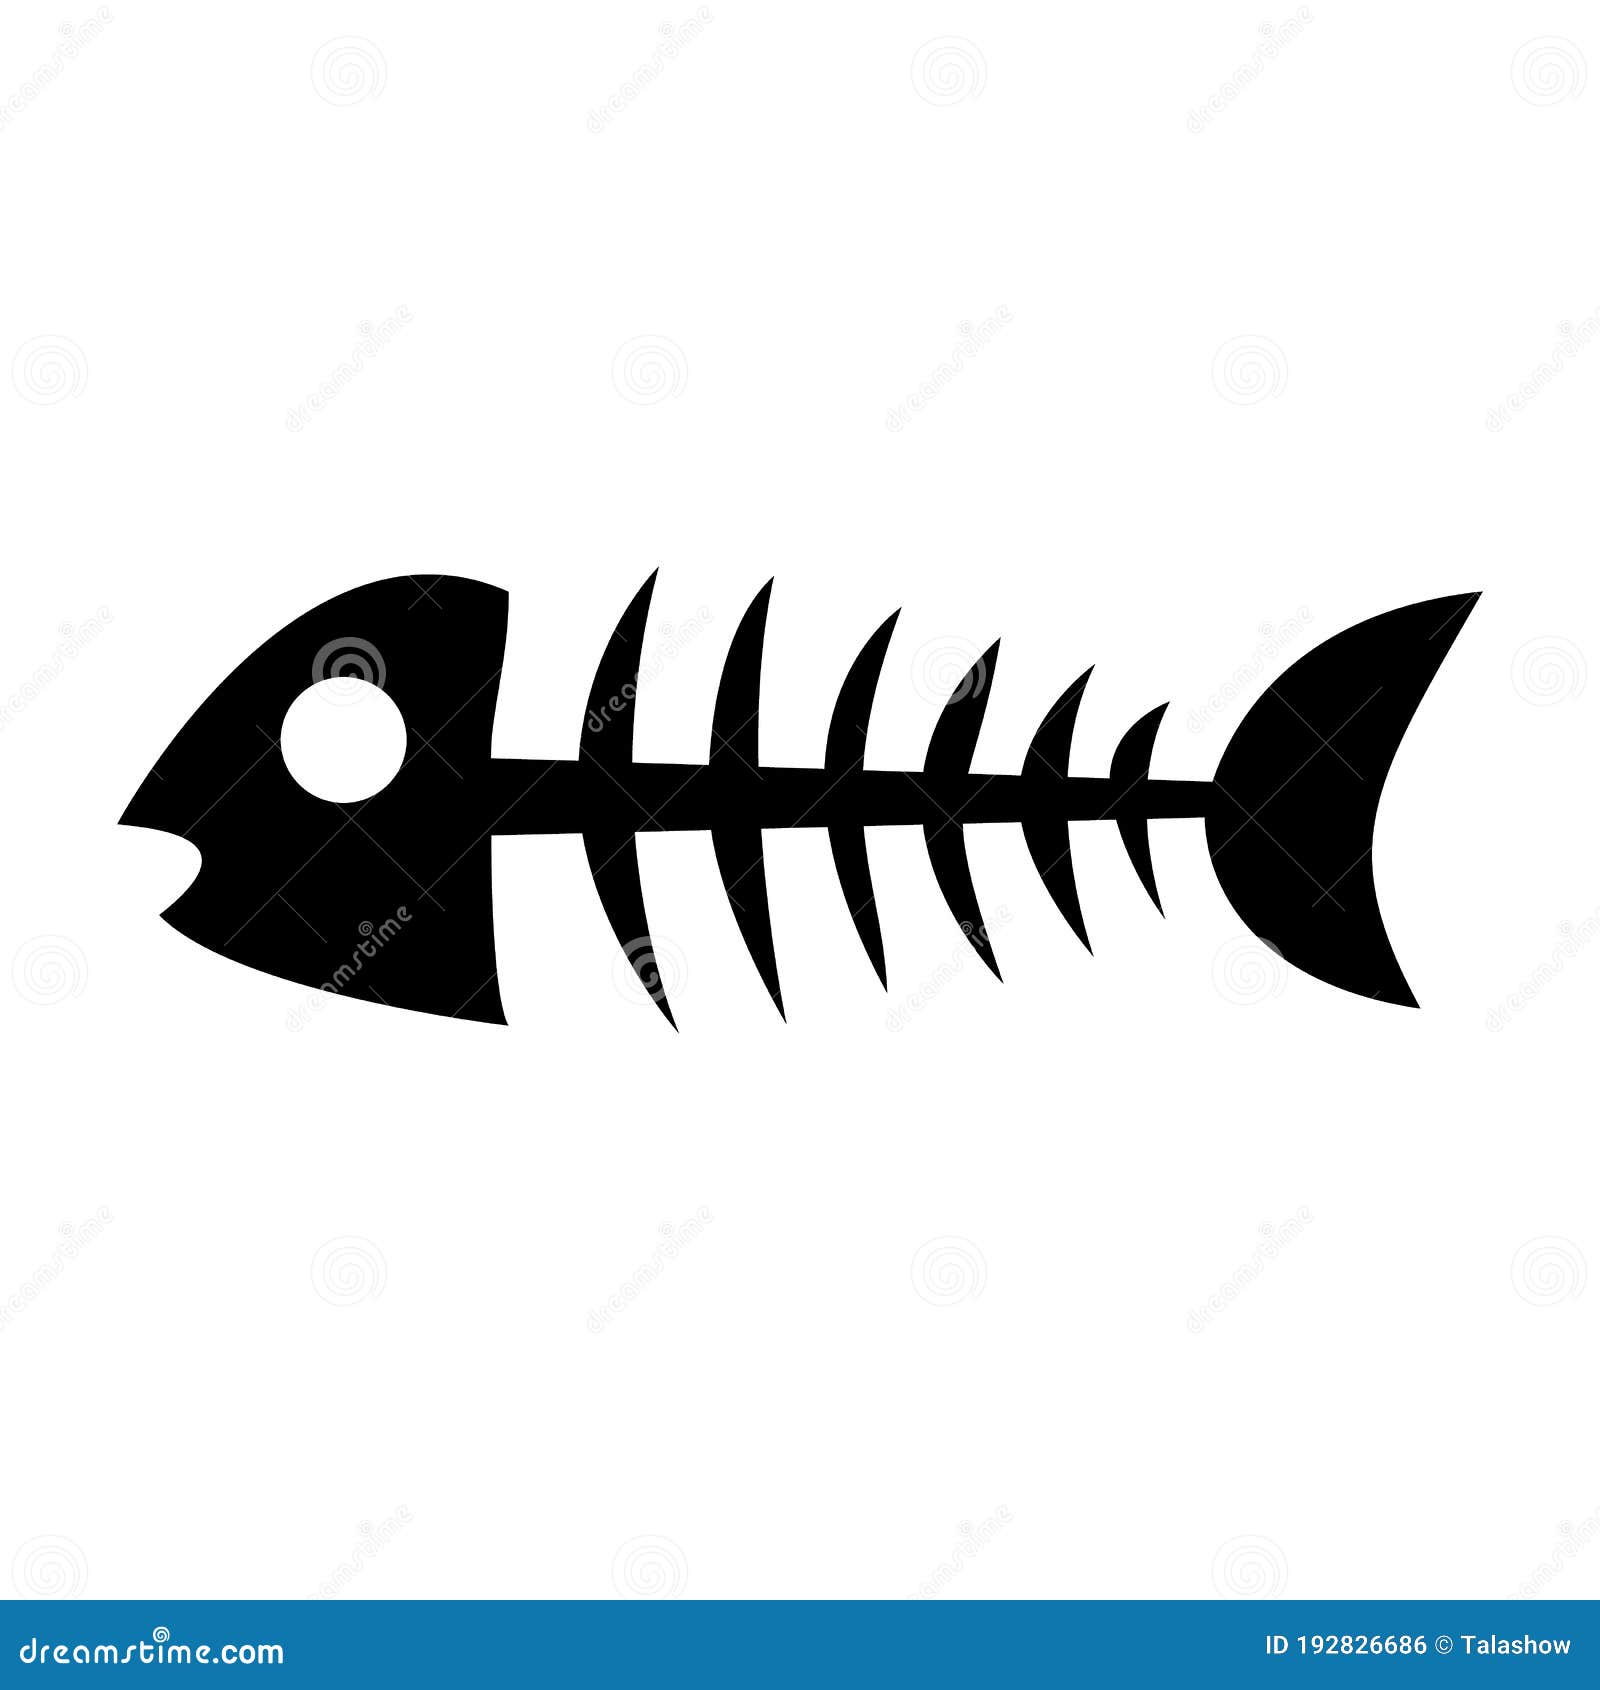 https://thumbs.dreamstime.com/z/fish-skeleton-icon-white-isolated-background-192826686.jpg